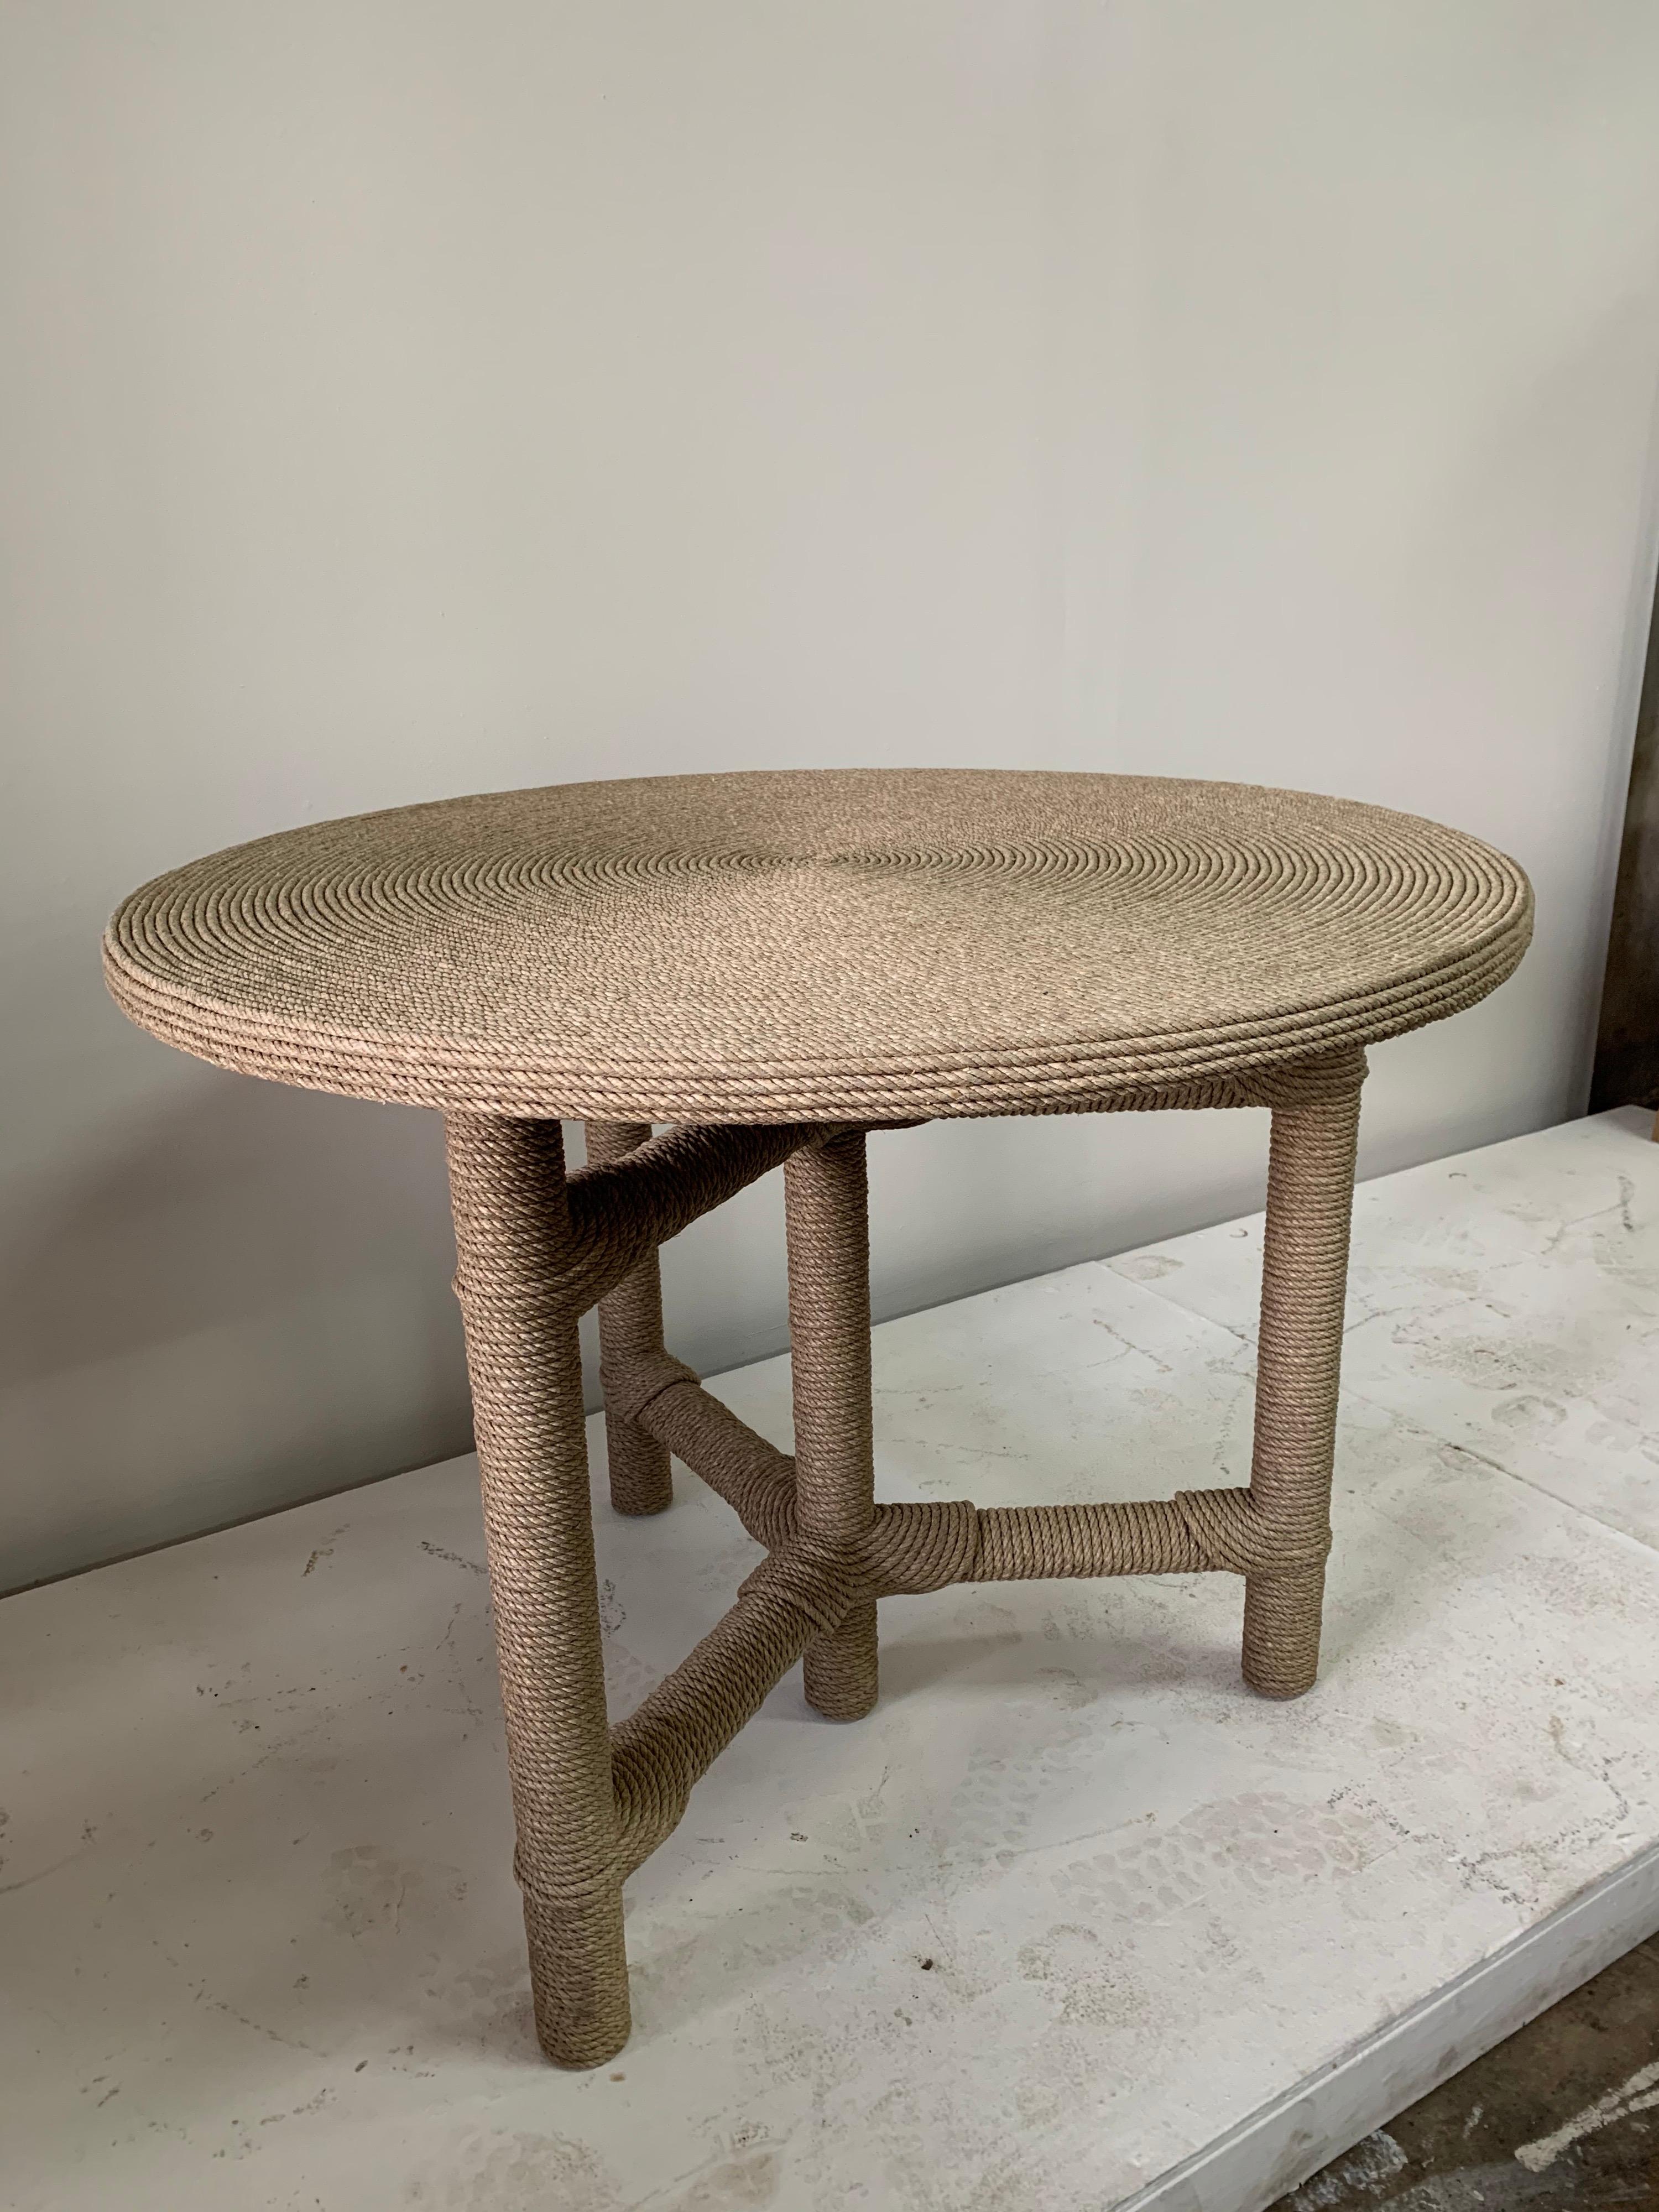 French Christian Astuguevieille Afriba Rope Clad Foyer Table